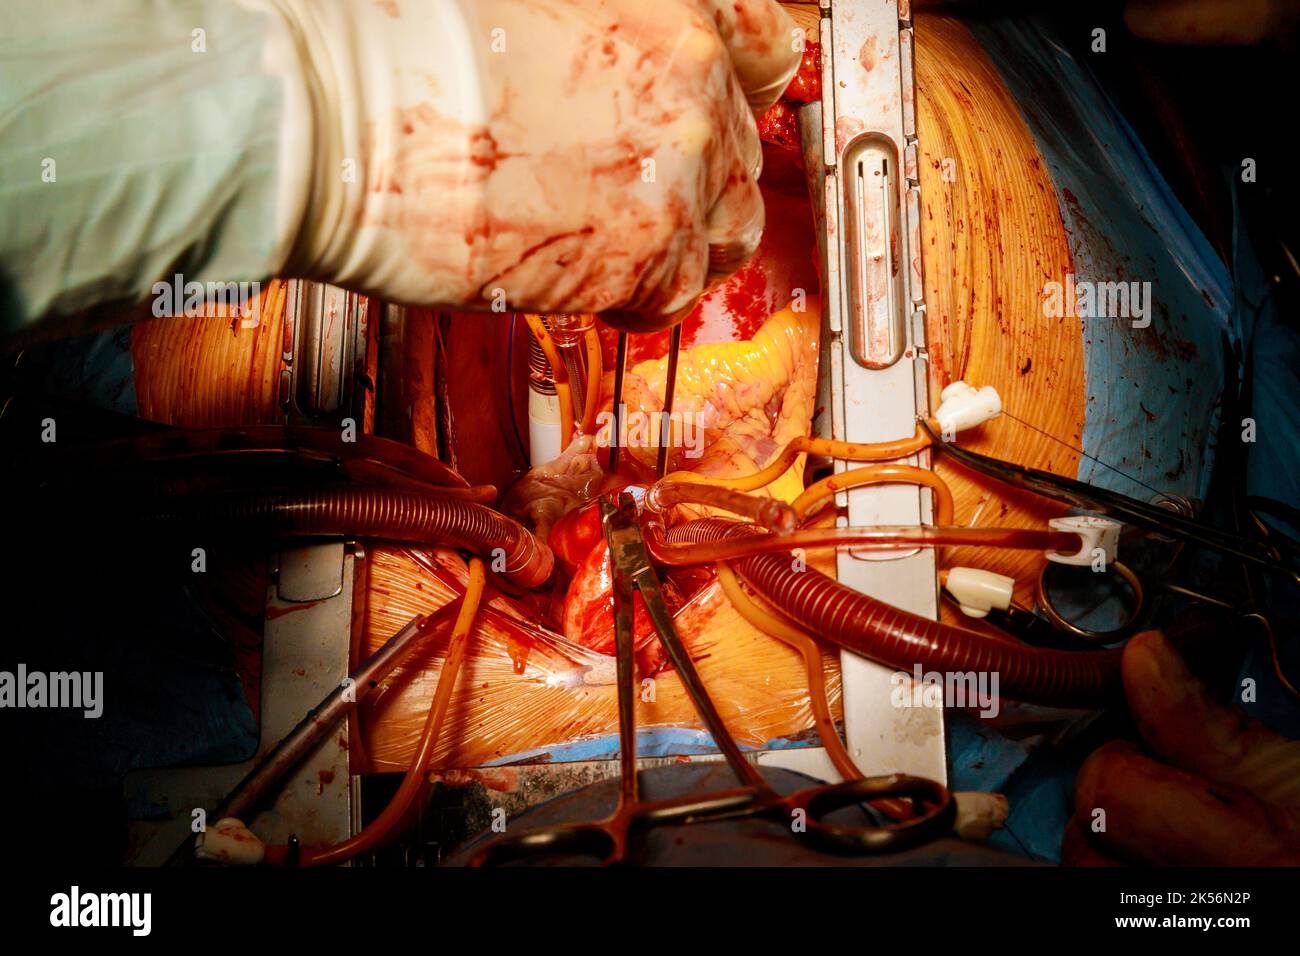 The process of coronary artery bypass graft CABG for heart operations due to coronary heart disease takes place in the operating room of a hospital Stock Photo